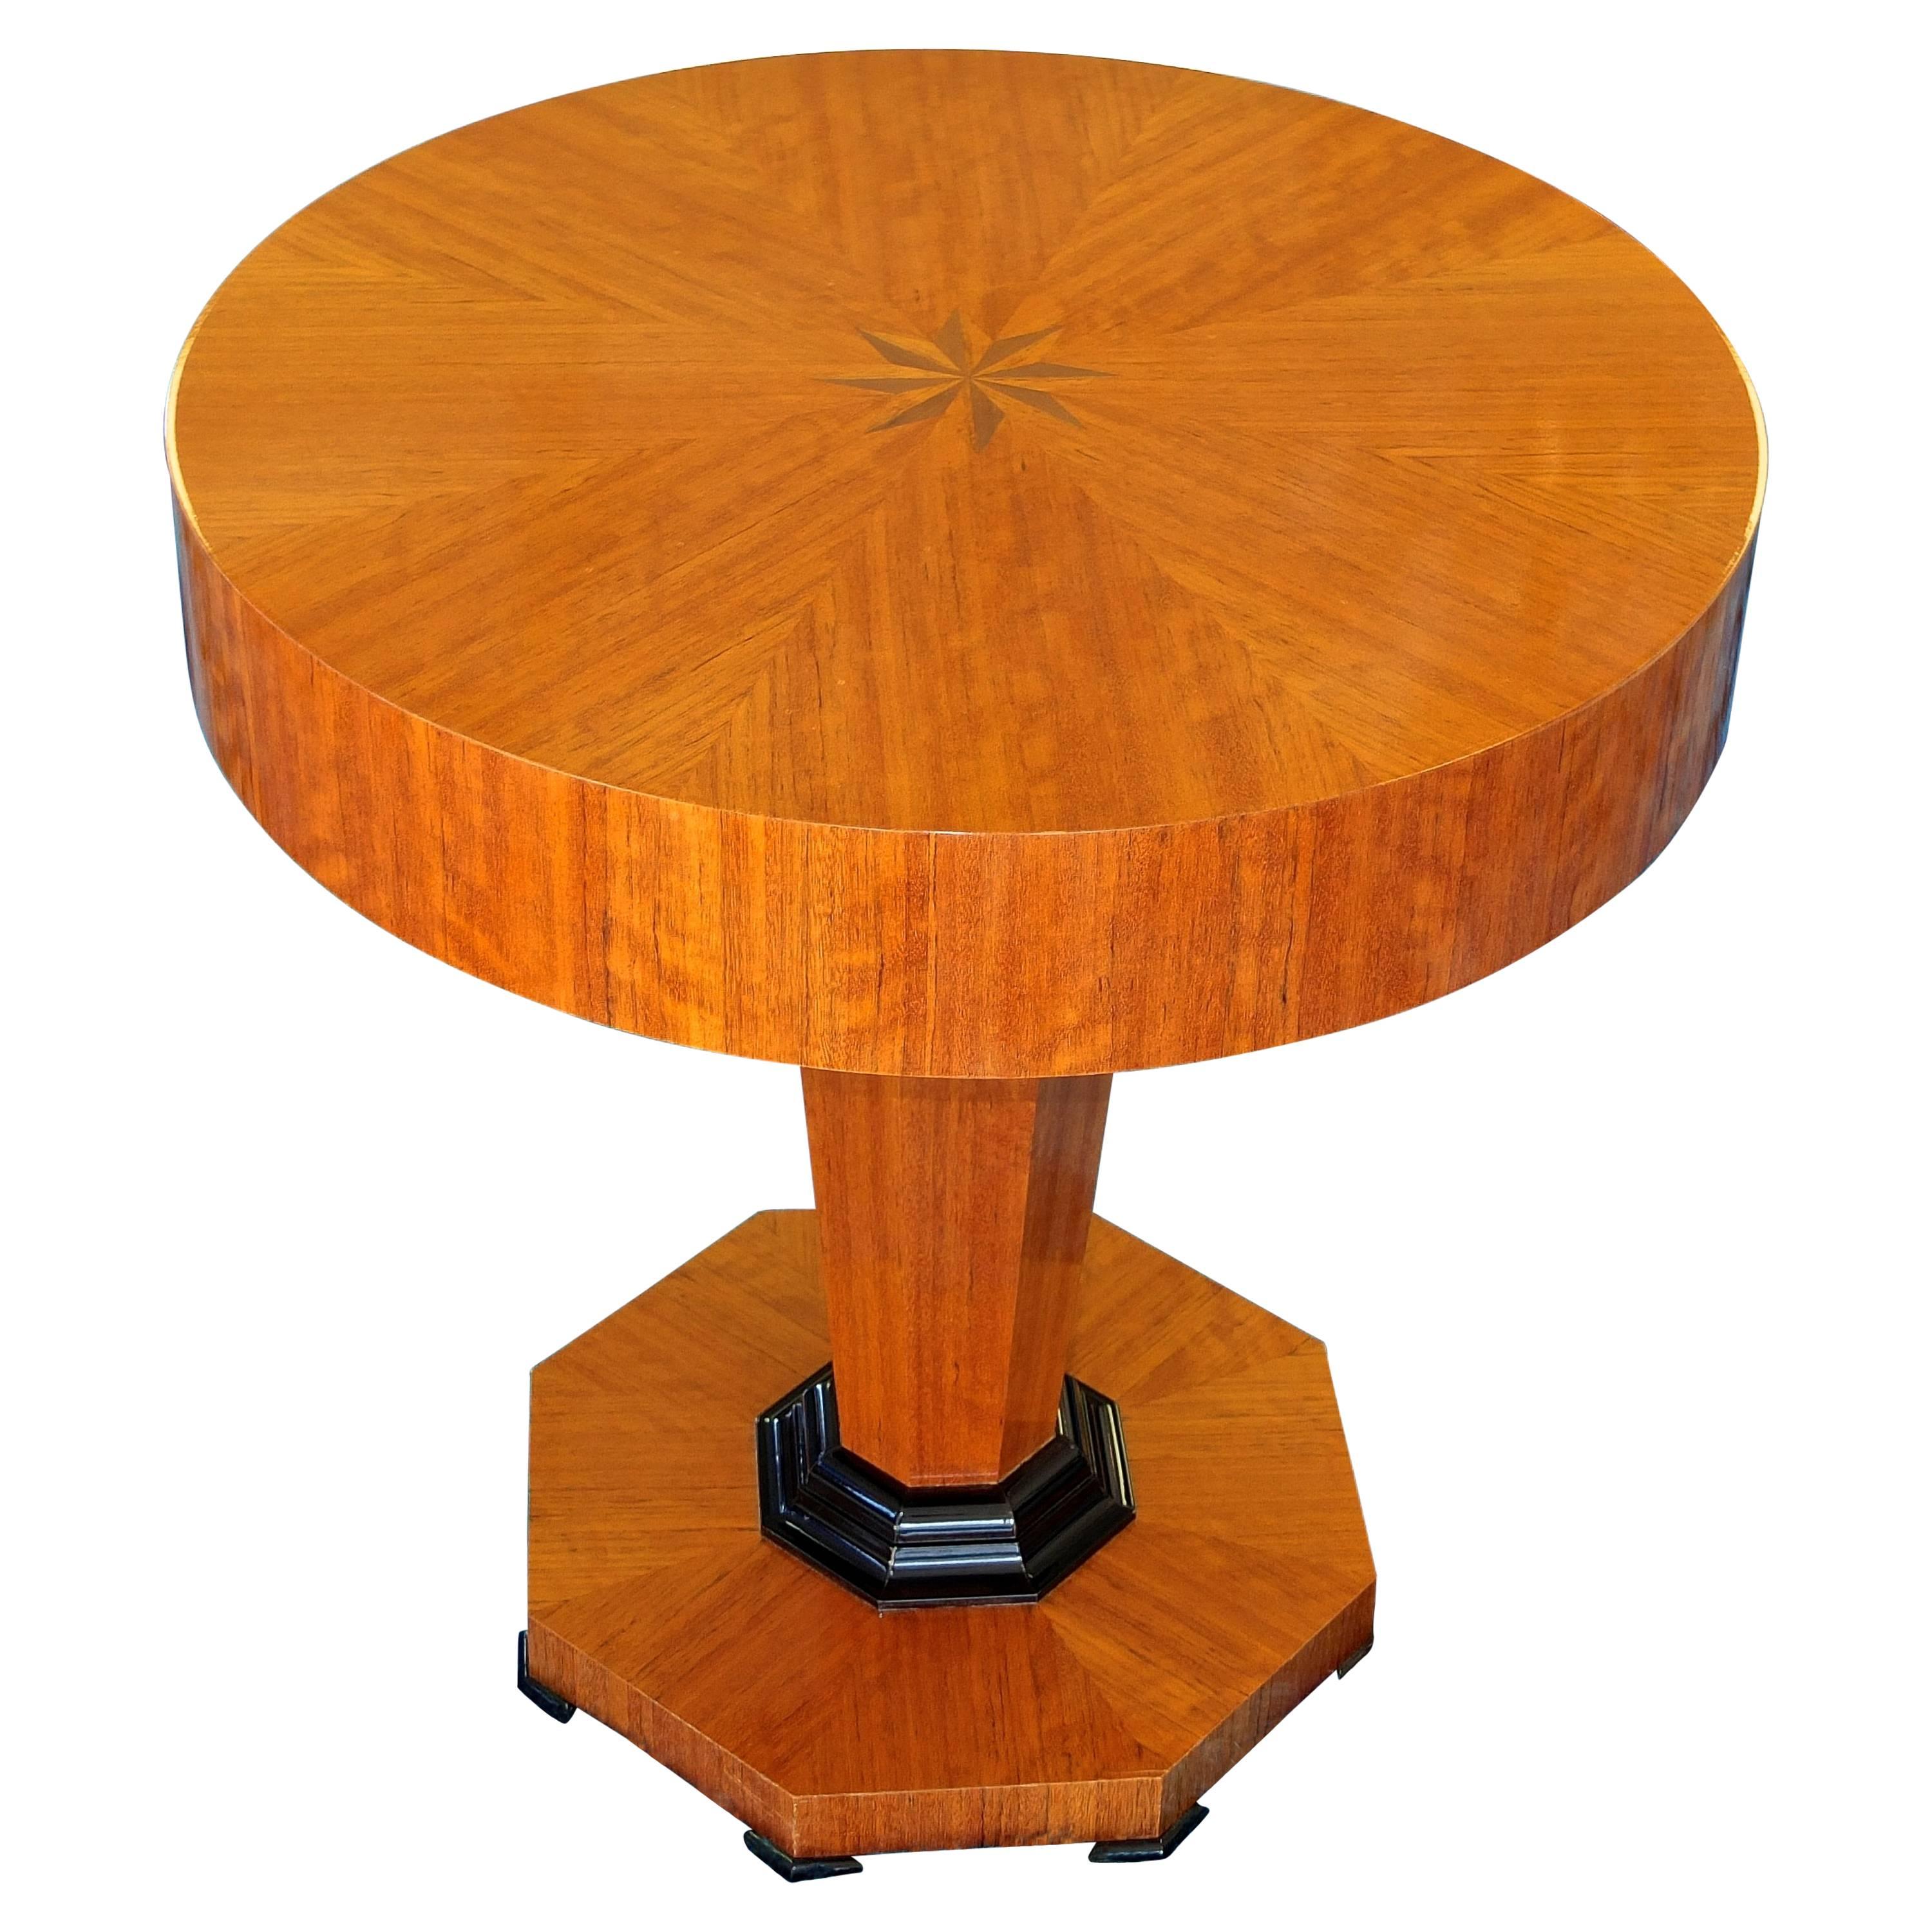 Studio Craft Tropical Olive Wood Pedestal Table by Gregg Lipton For Sale